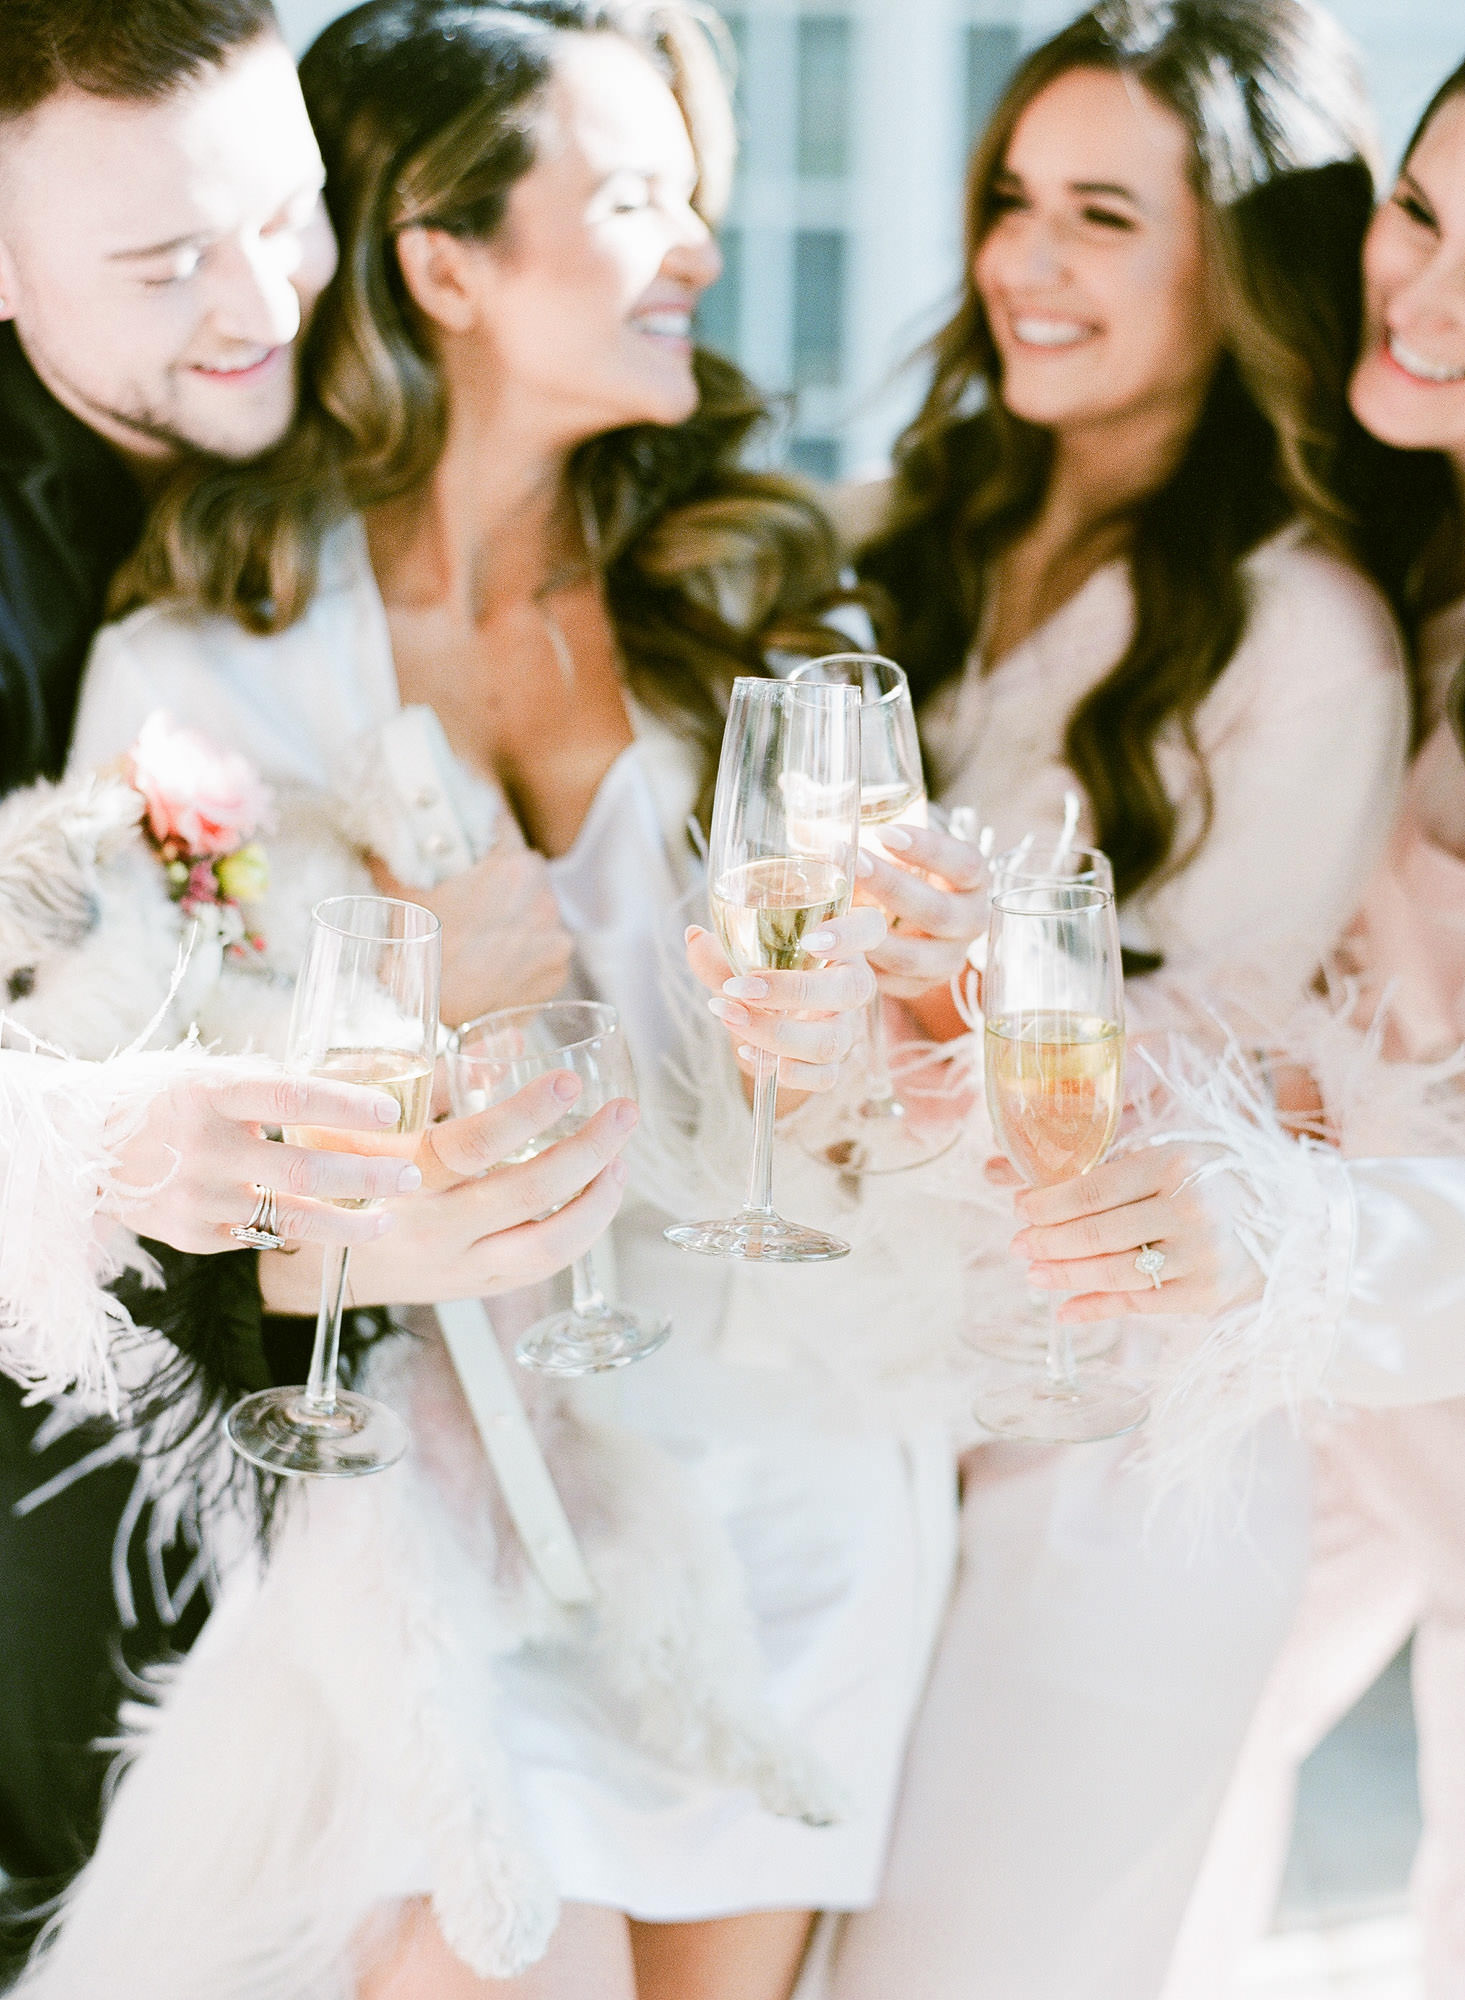 bridal party getting ready and celebrating together